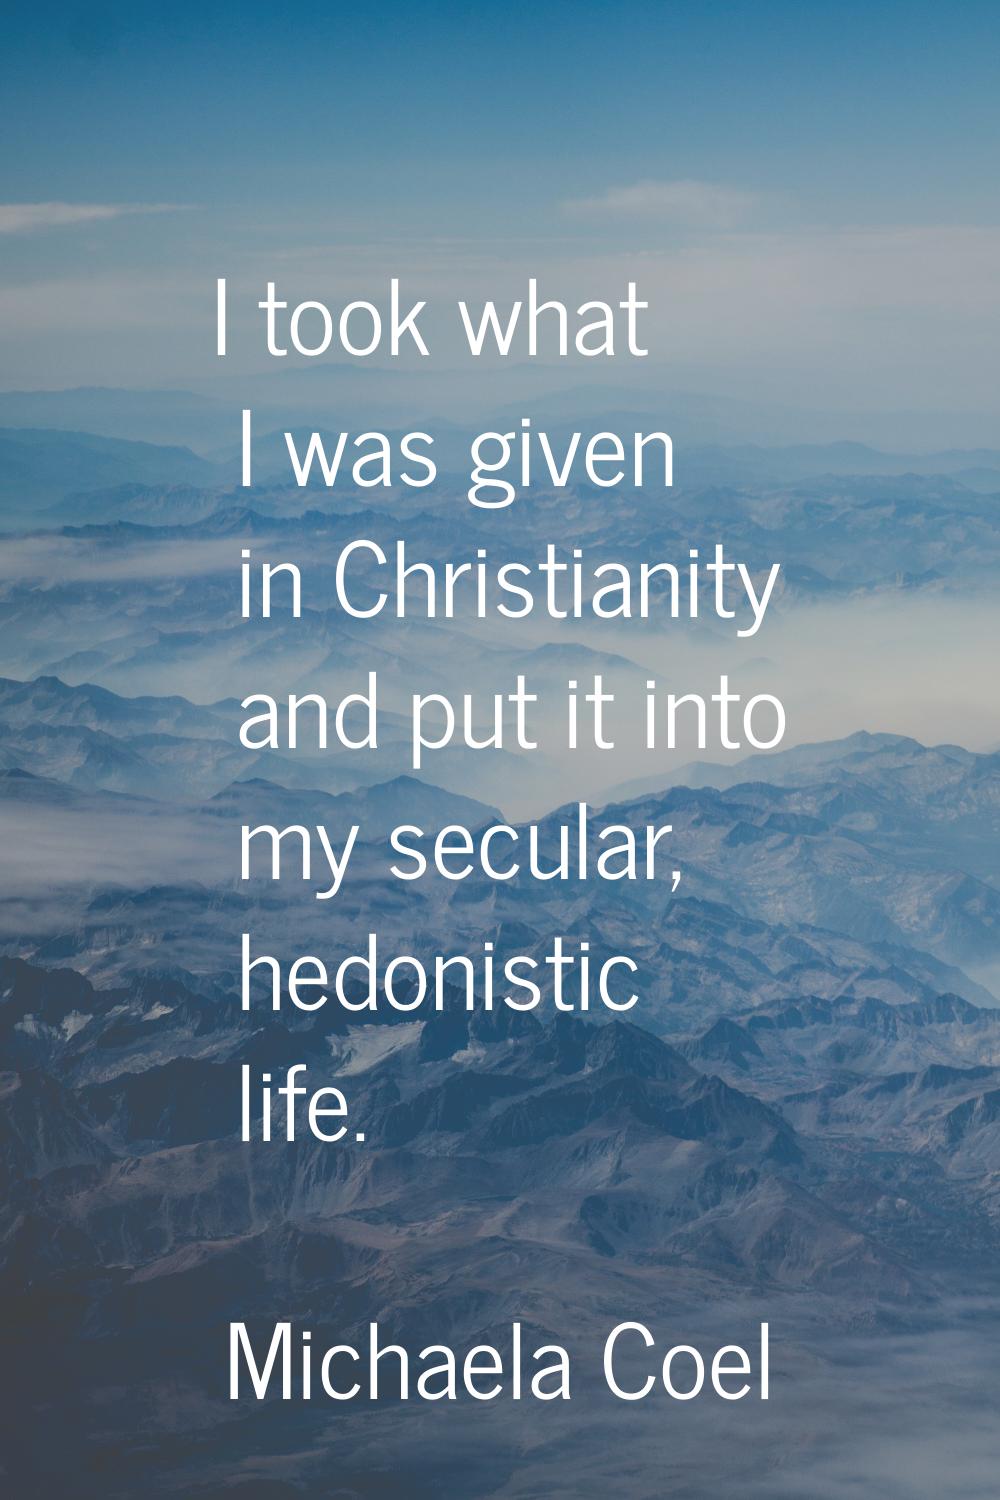 I took what I was given in Christianity and put it into my secular, hedonistic life.